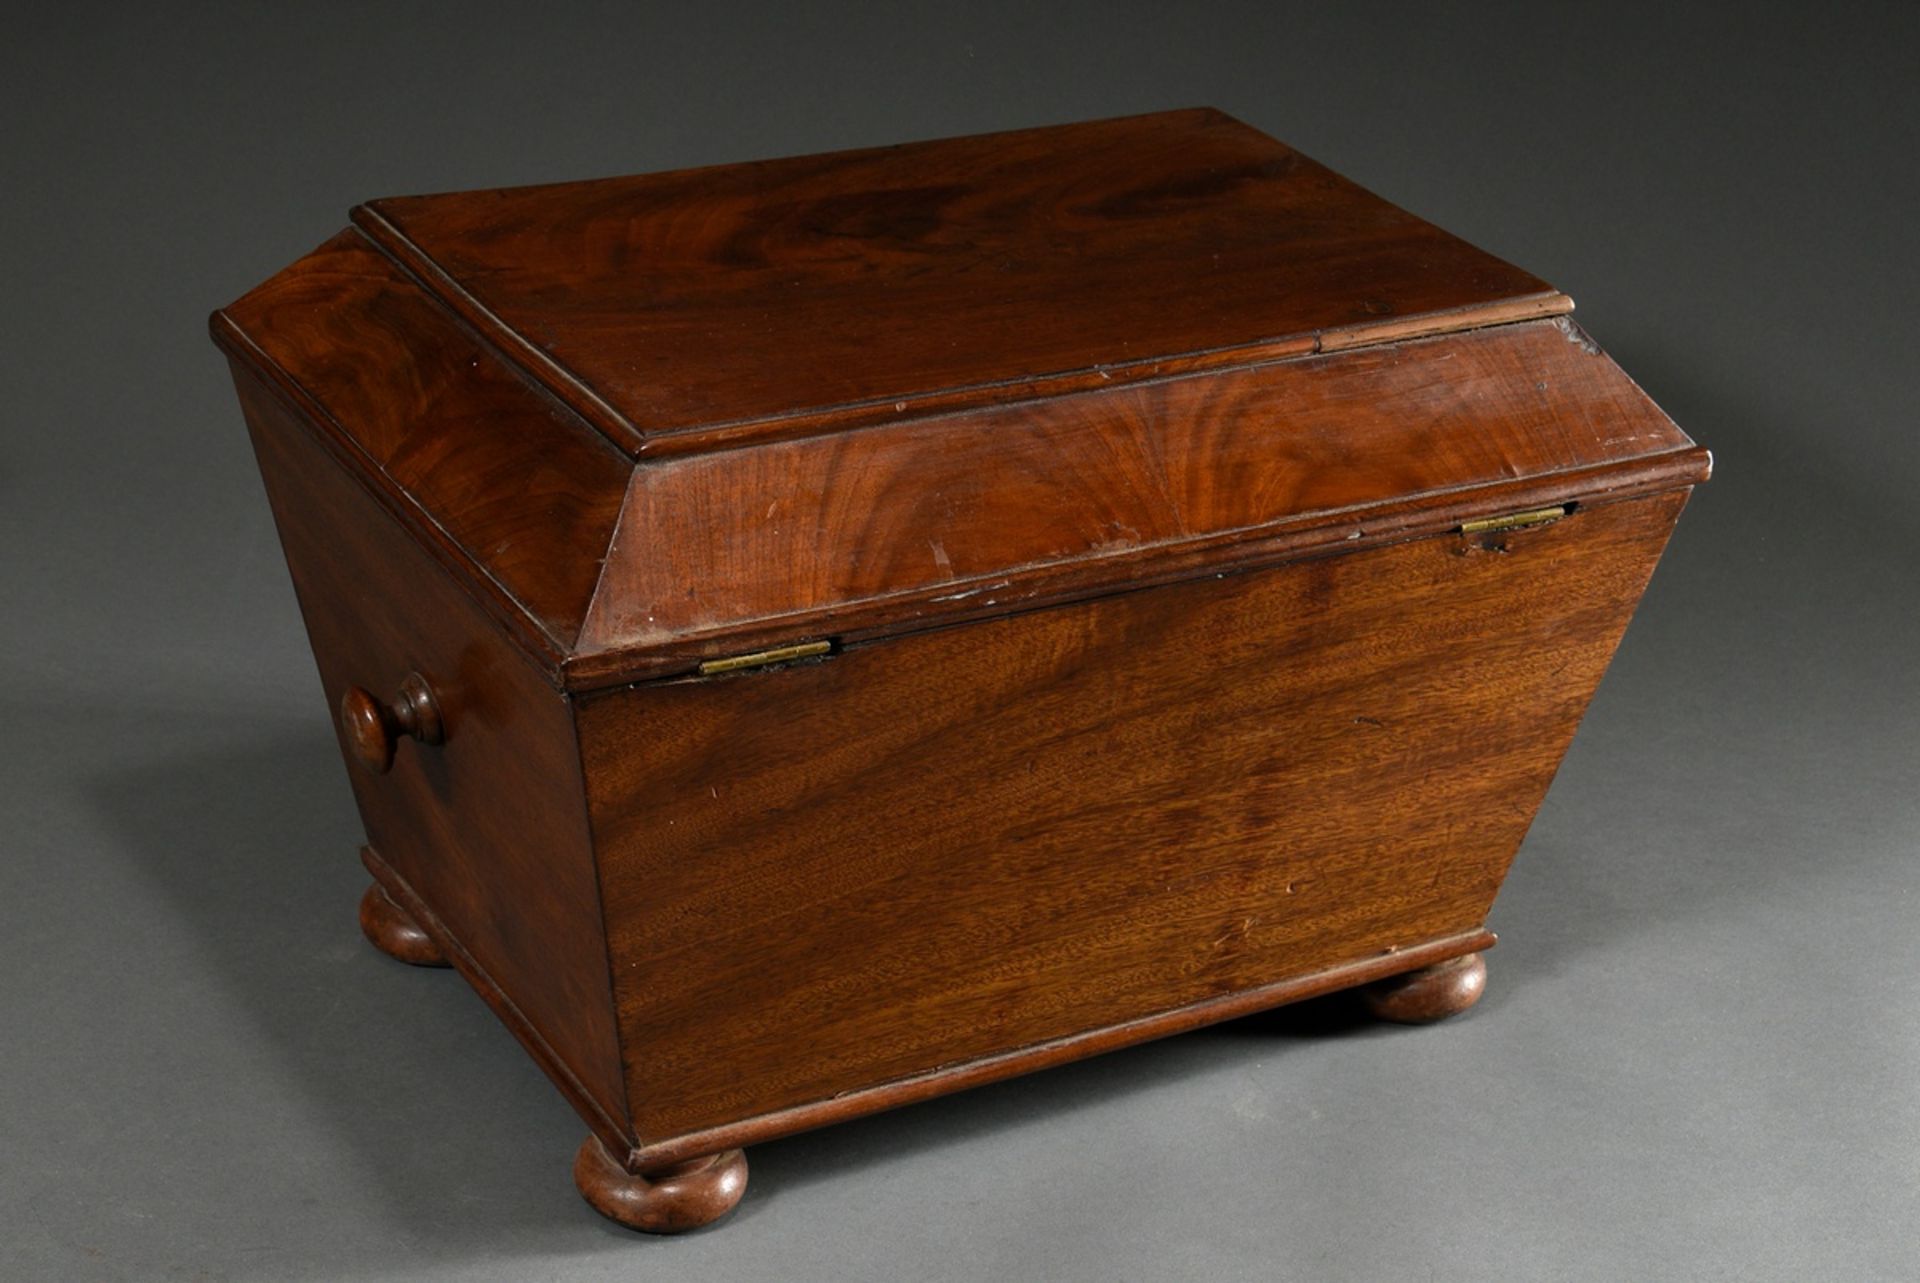 Large mahogany box in the shape of a sarcophagus with carrying knobs on the sides, compartmentalisa - Image 2 of 3